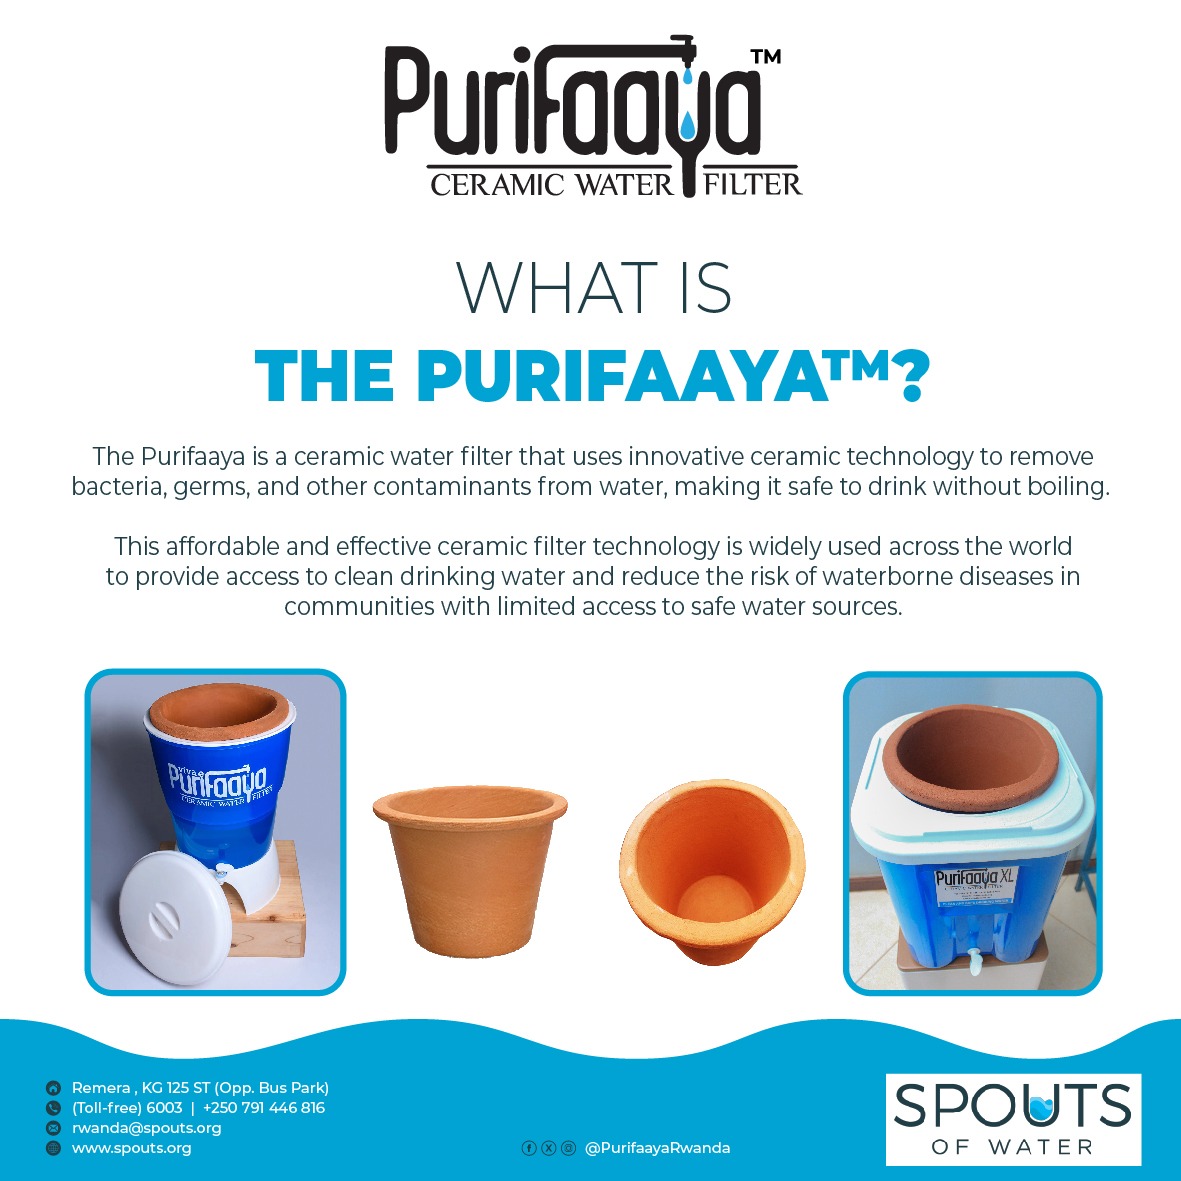 Get a Purifaaya for your home or business today!! 
No more boiling and a limited supply of 3-5 liters of filtered water per hour. Order yours at purifaaya.com, or call 079-144-6816 or the 6003 toll-free line. #Purifaaya #Ceramicfilter #CleanWaterForAll